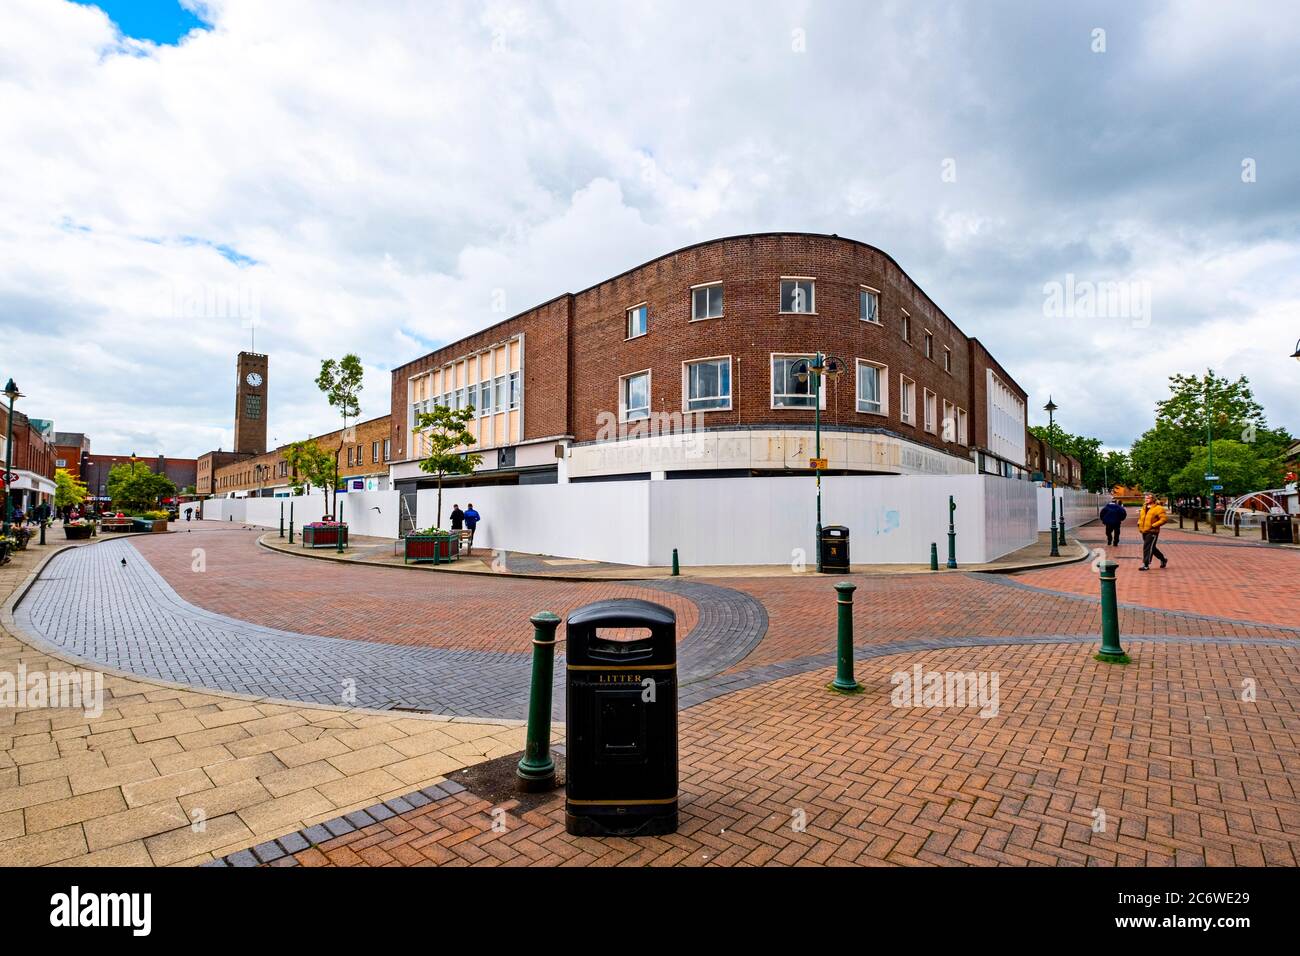 Boarded up town centre on the corner of Queensway and Victoria Street, Crewe Cheshire UK Stock Photo